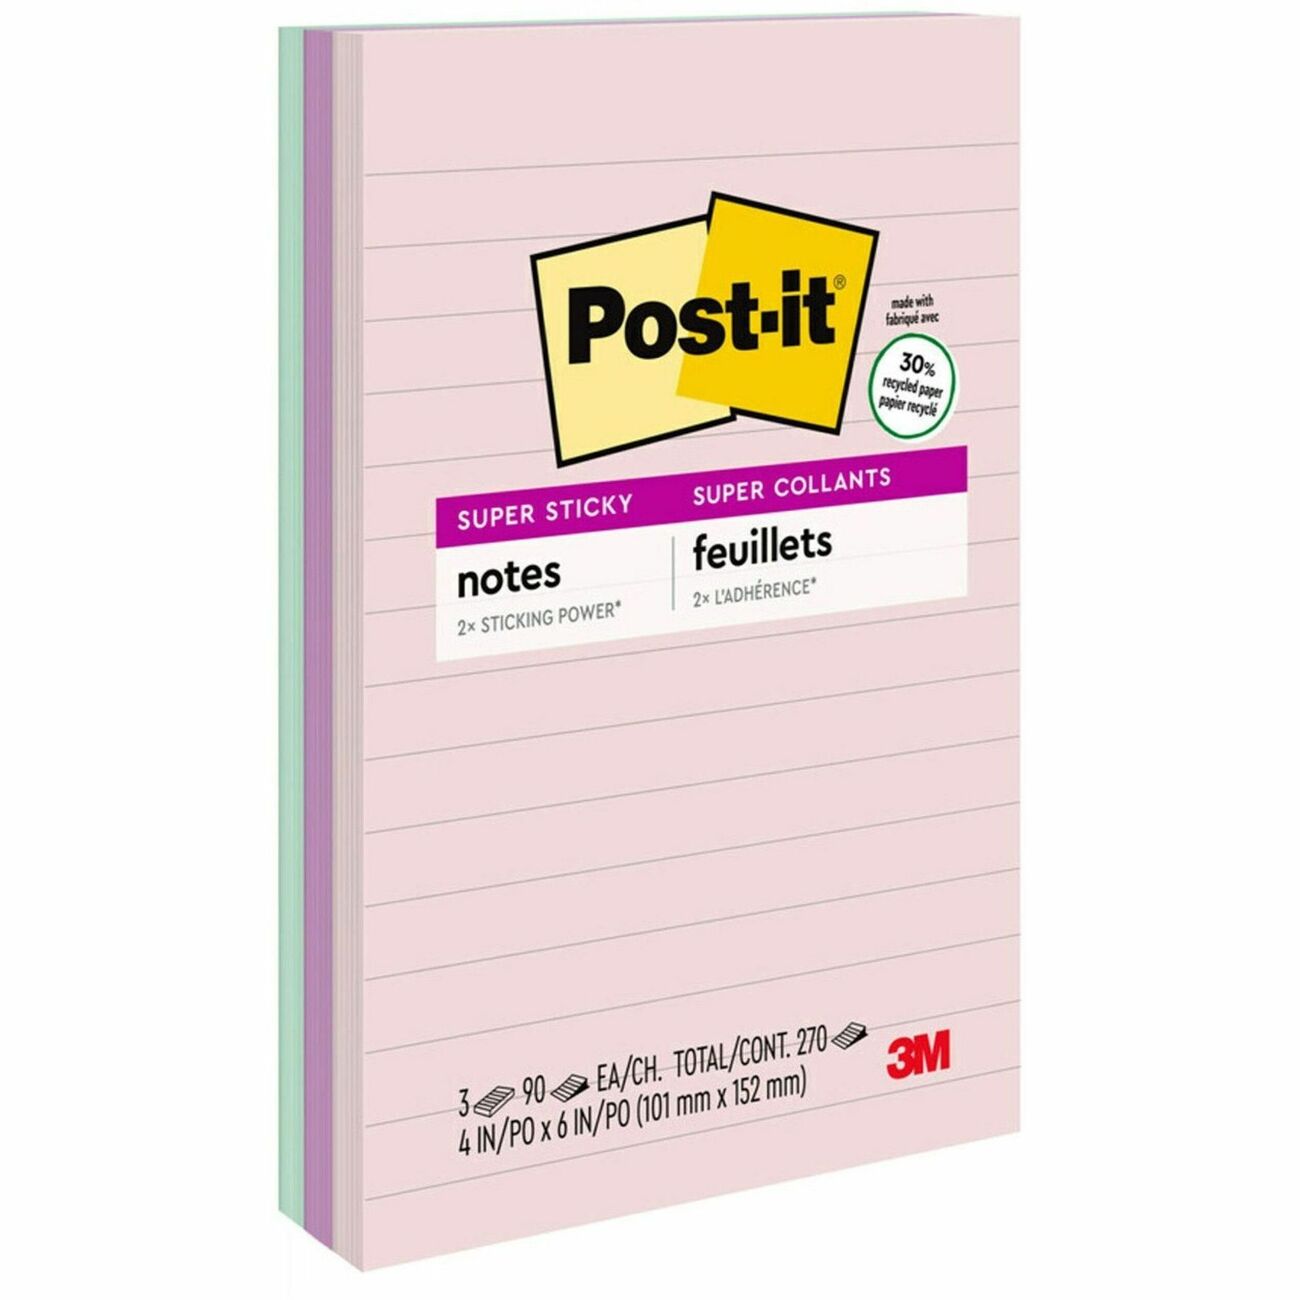 Post-it Notes Super Sticky Pads in Miami Colors, 2 x 2, 90/Pad, 8